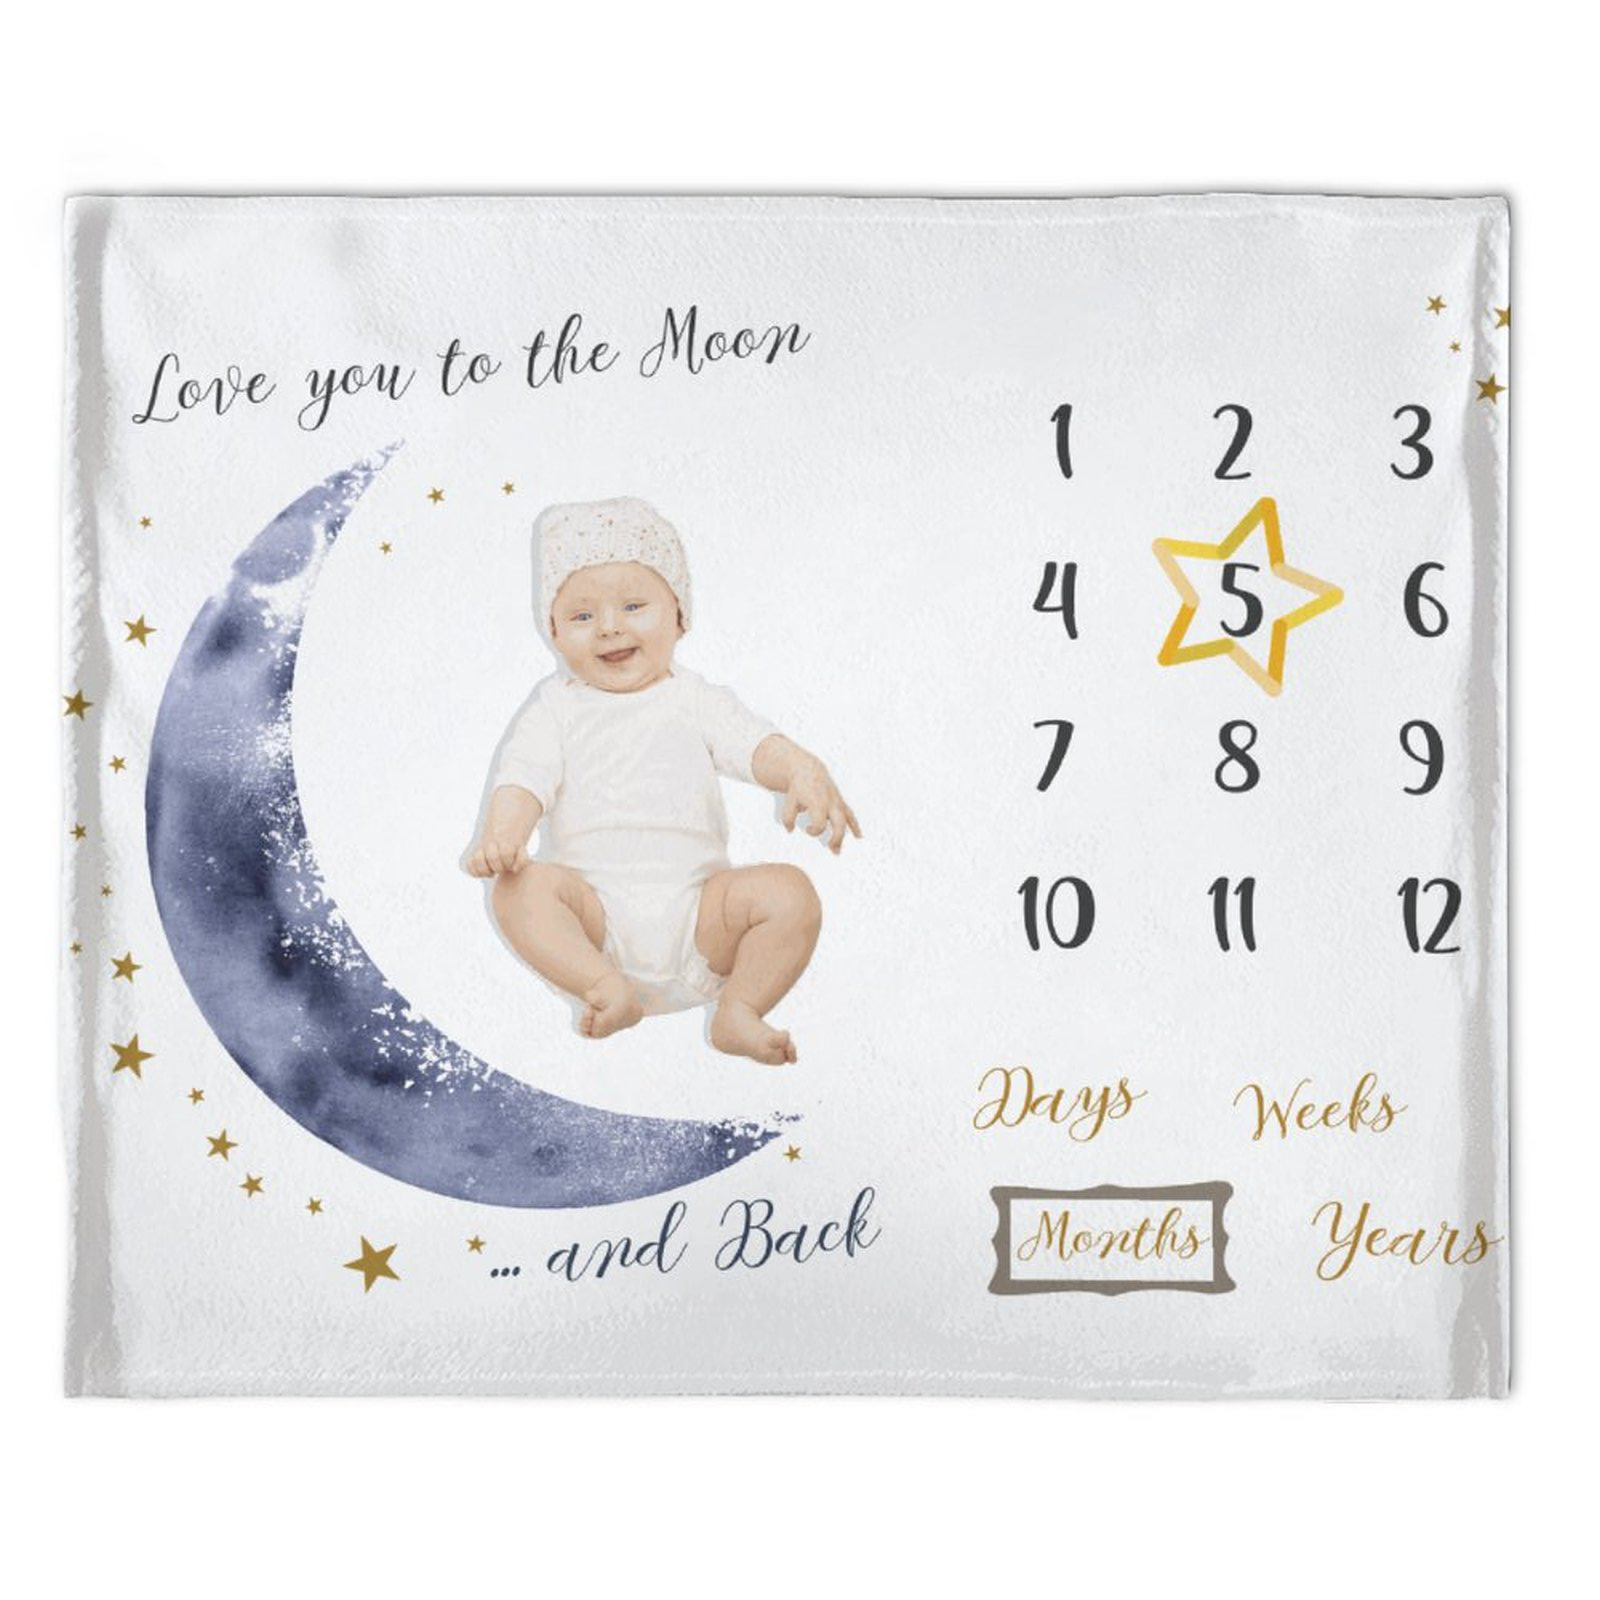 Love you to the moon and back-Baby Month Milestone Blanket - First Year Calendar Monthly Growth Chart - Baby Shower Gifts